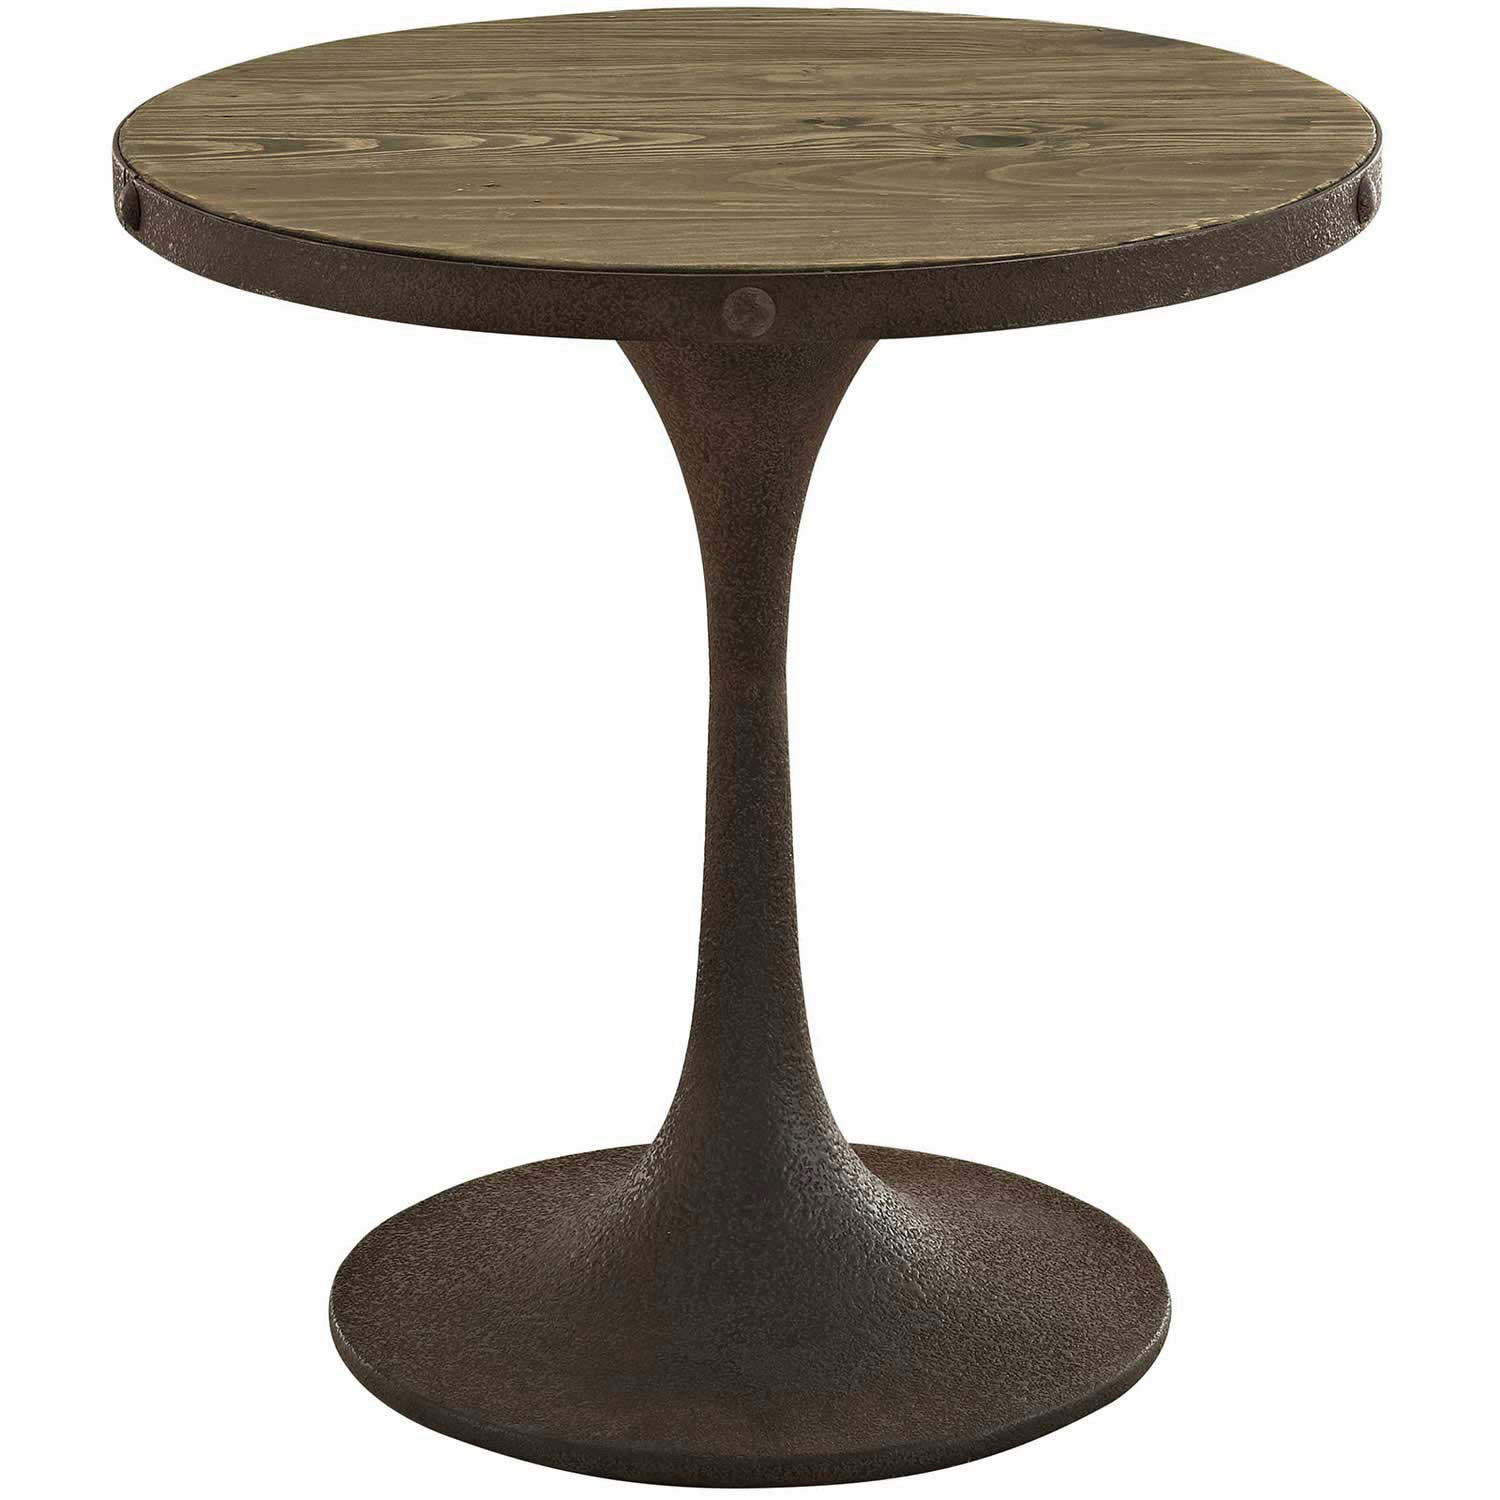 Modway Drive Wood Top Side Table - Brown